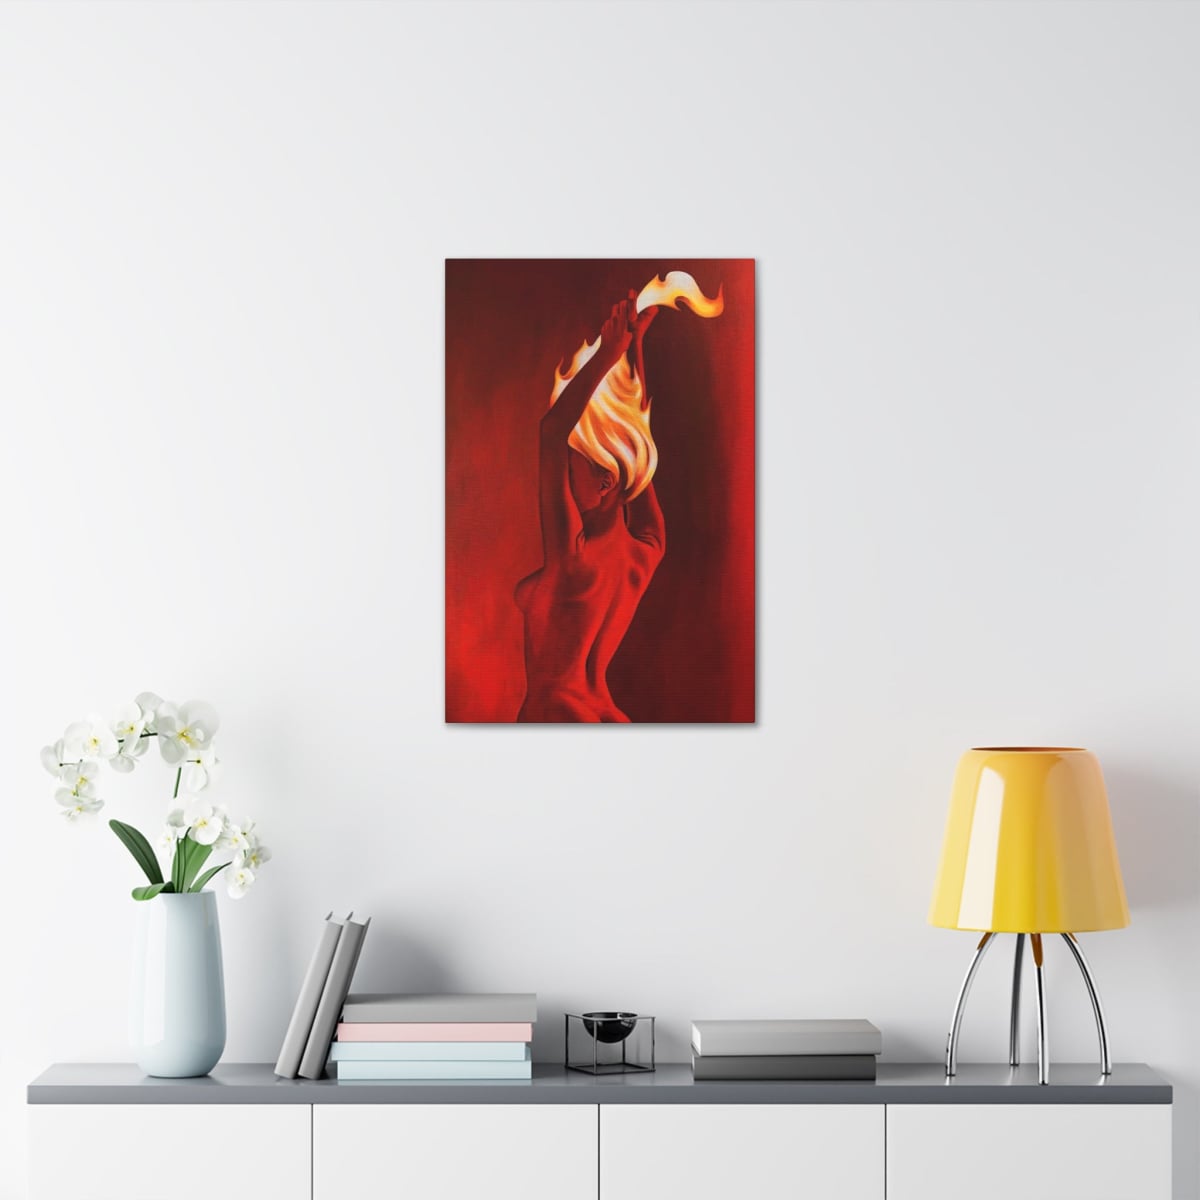 Bold Flame Canvas for Provocative Interior